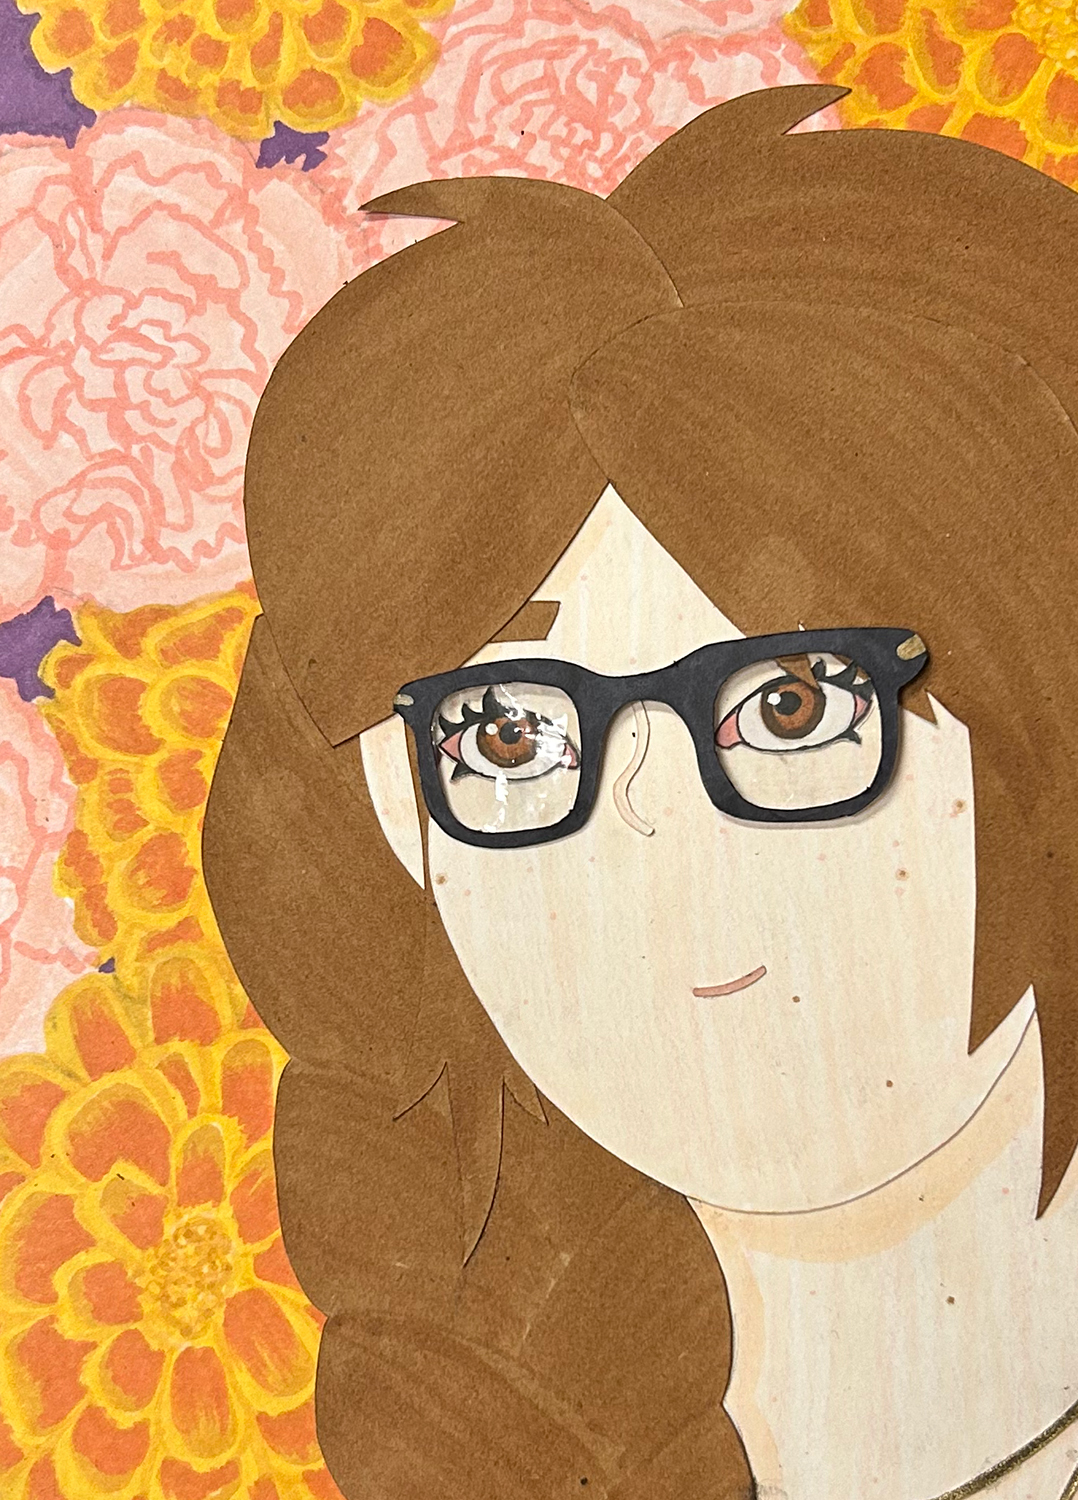 Close-up image of cut-paper portrait of a girl with brown hair in a braid, brown eyes, and freckles. She stares off towards the top left of the image through black glasses. The background is crowded with carnations and marigolds.